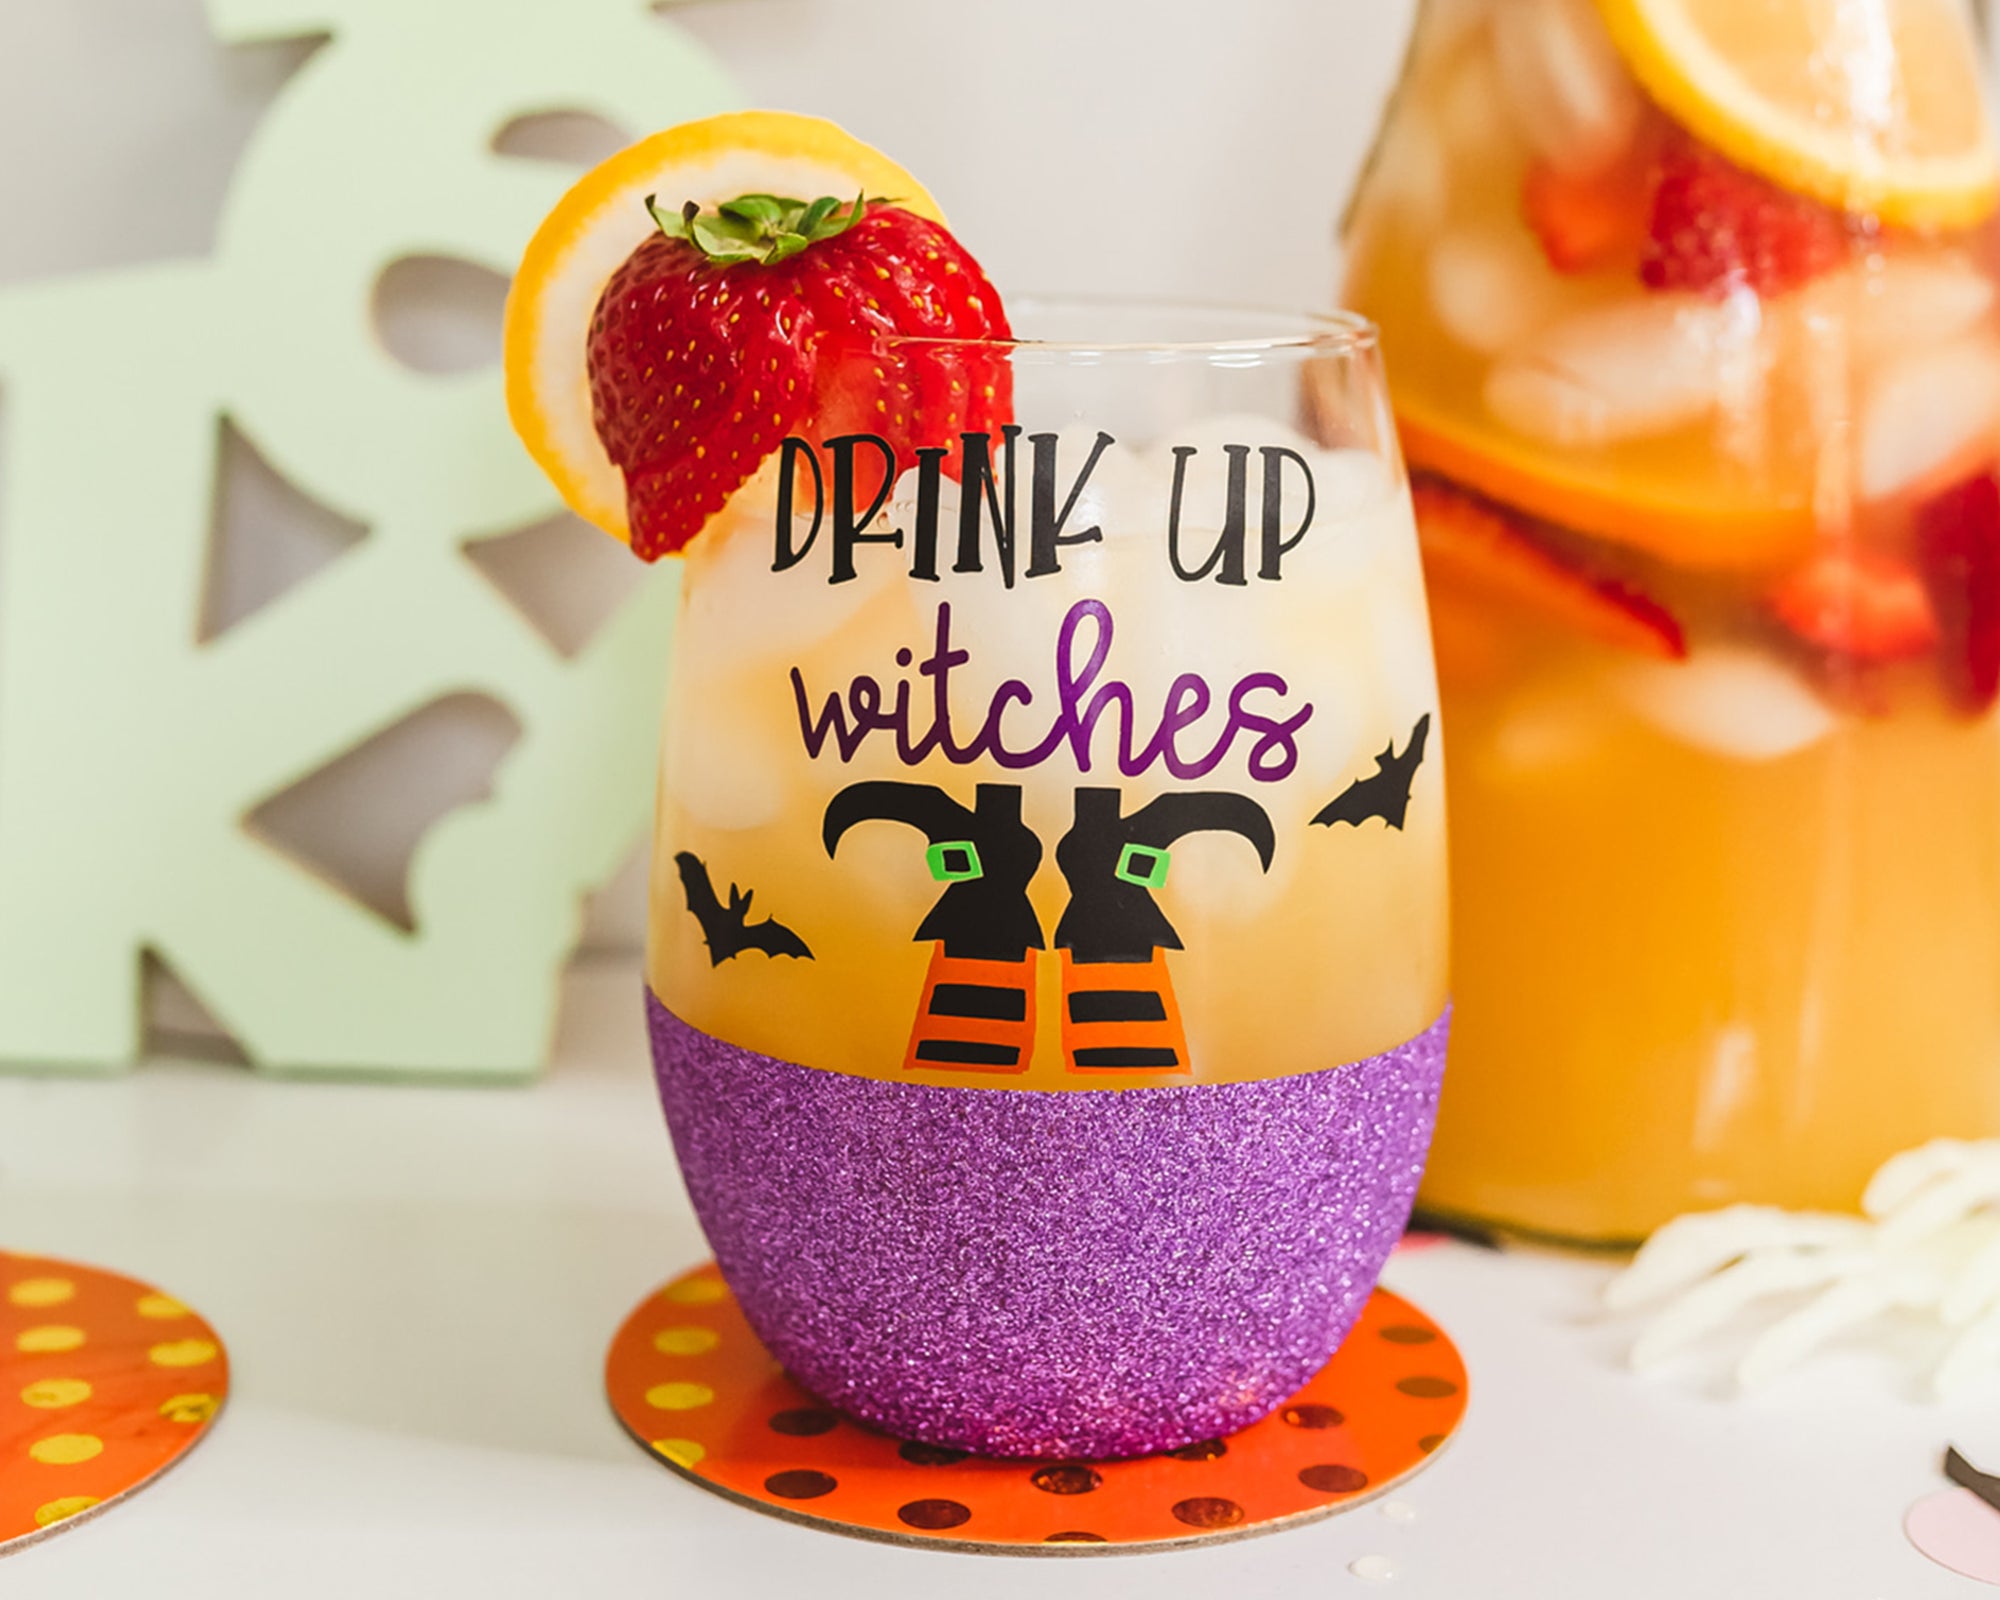 Drink Up Witches Wine Glass